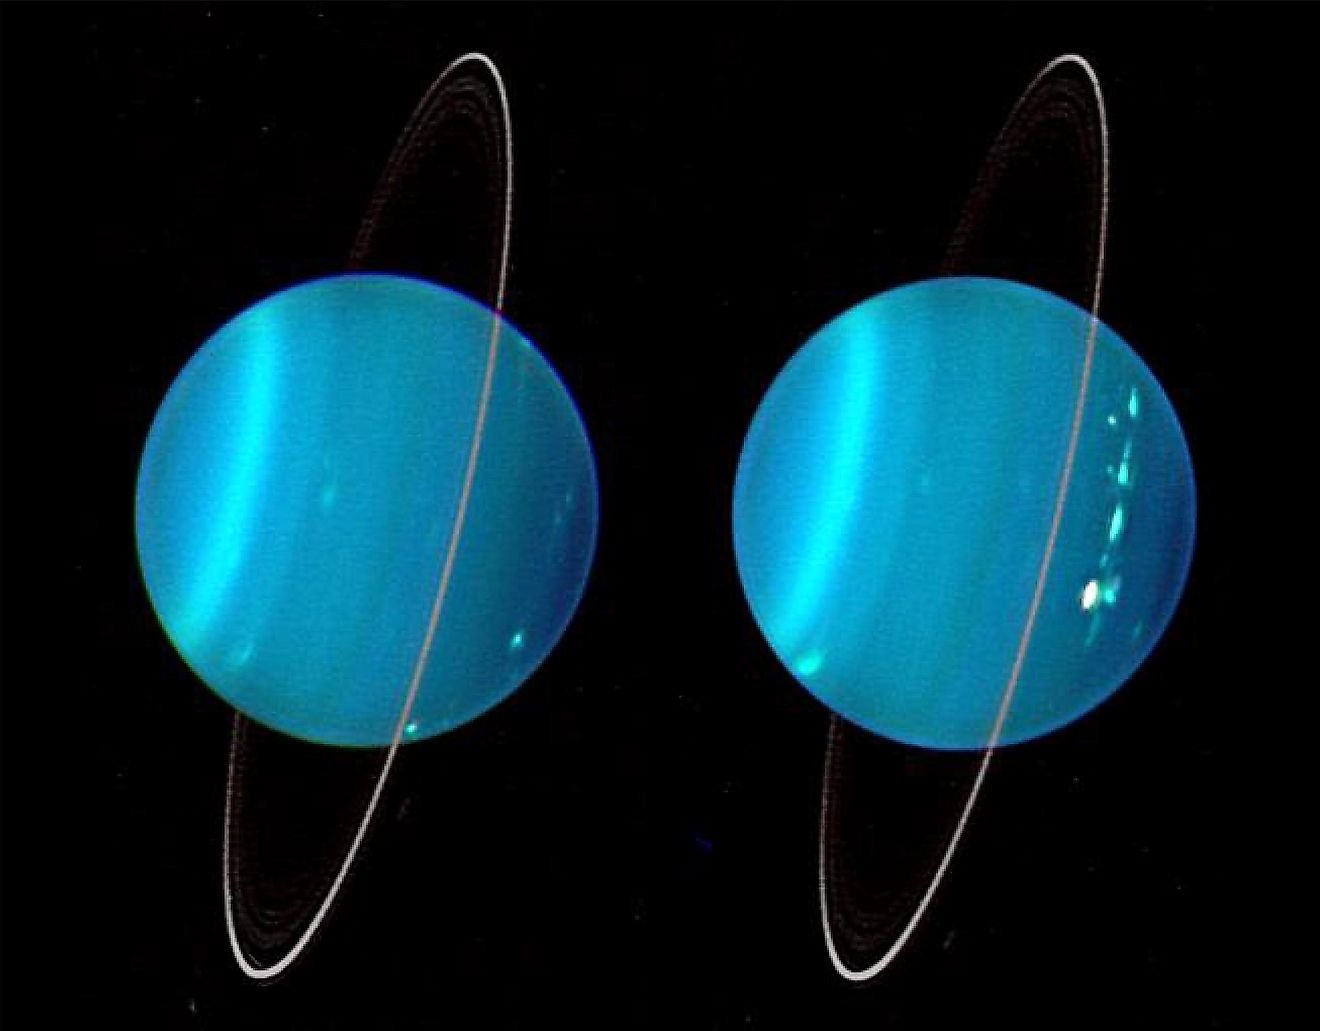 Why Does Uranus Spin On Its Side?